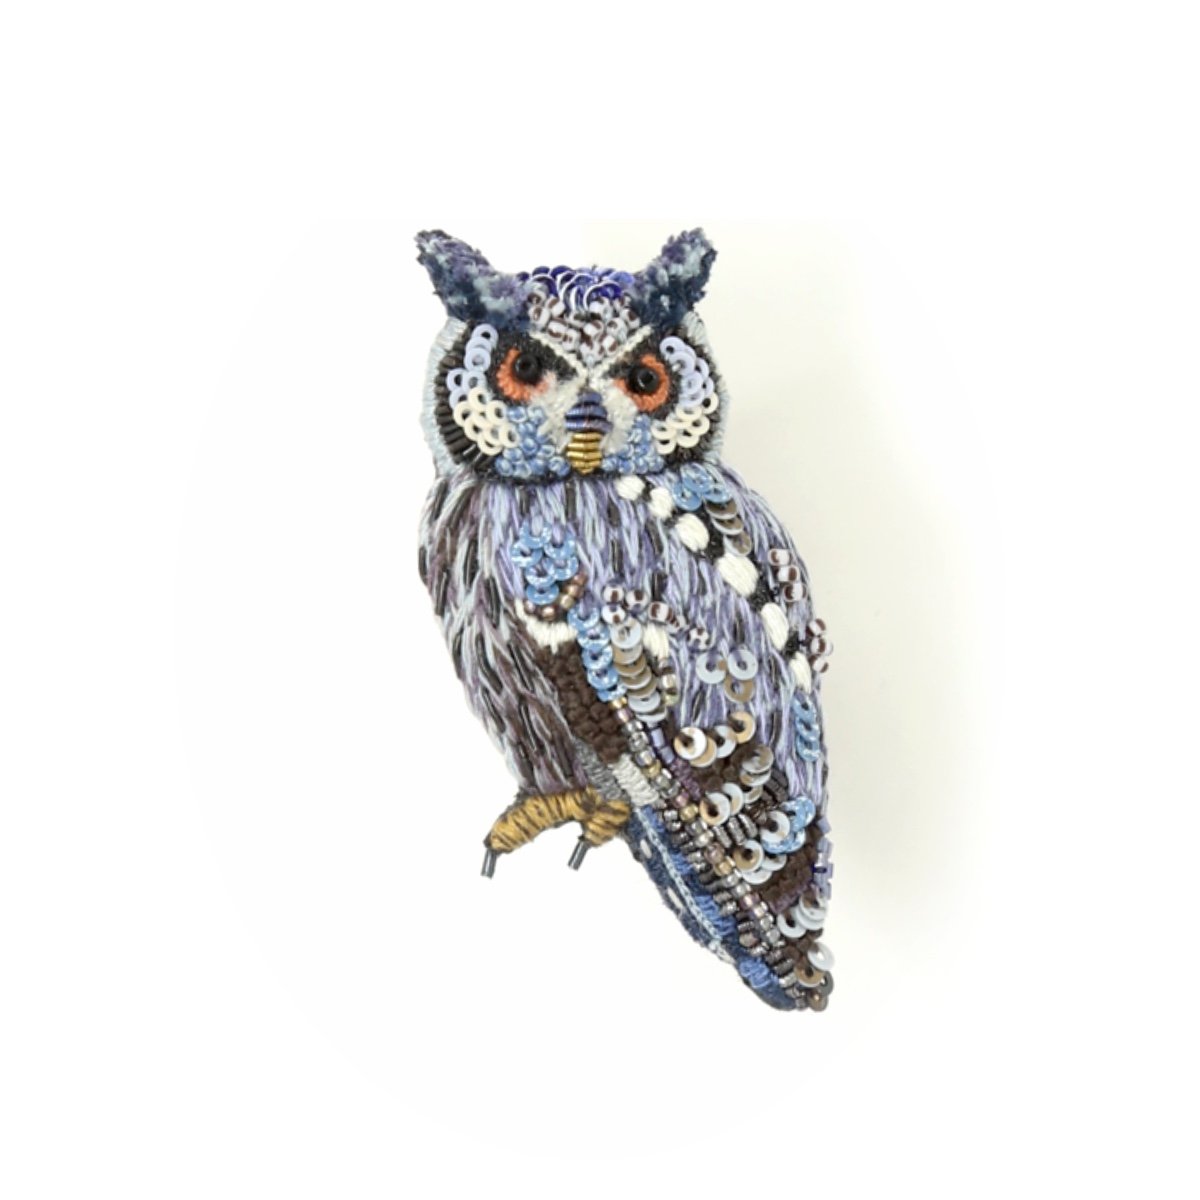 Southern White Faced Owl Brooch